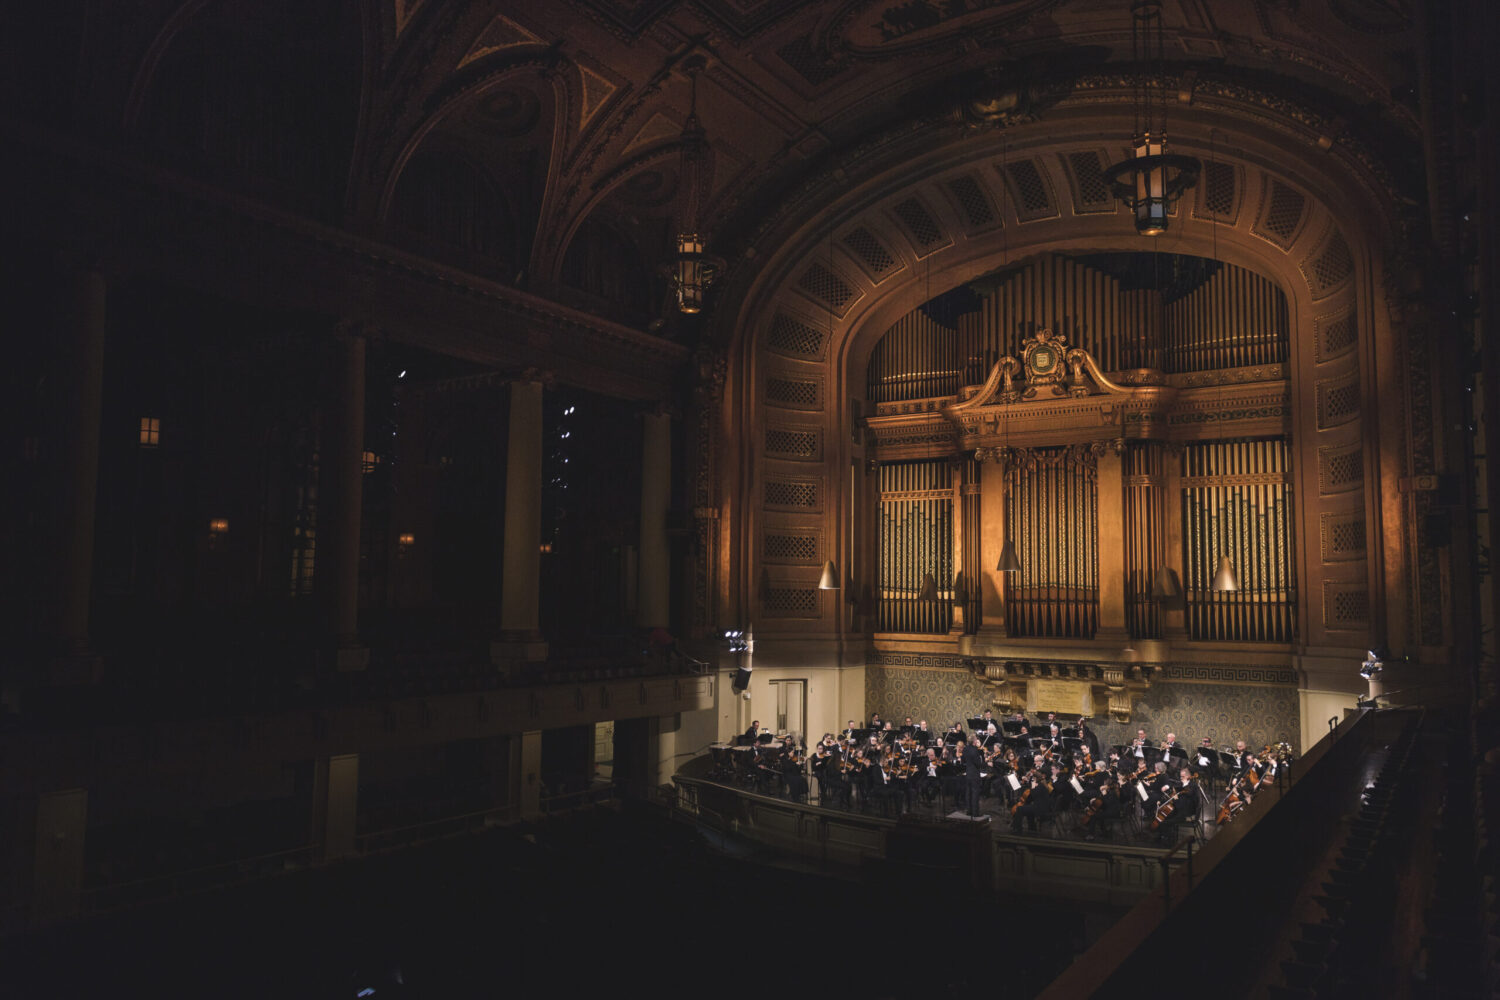 The orchestra plays on the stage at Woolsey Hall. The Hall is in shadows, and the golden organ pipes rise over the orchestra creating a moody and dynamic scene.